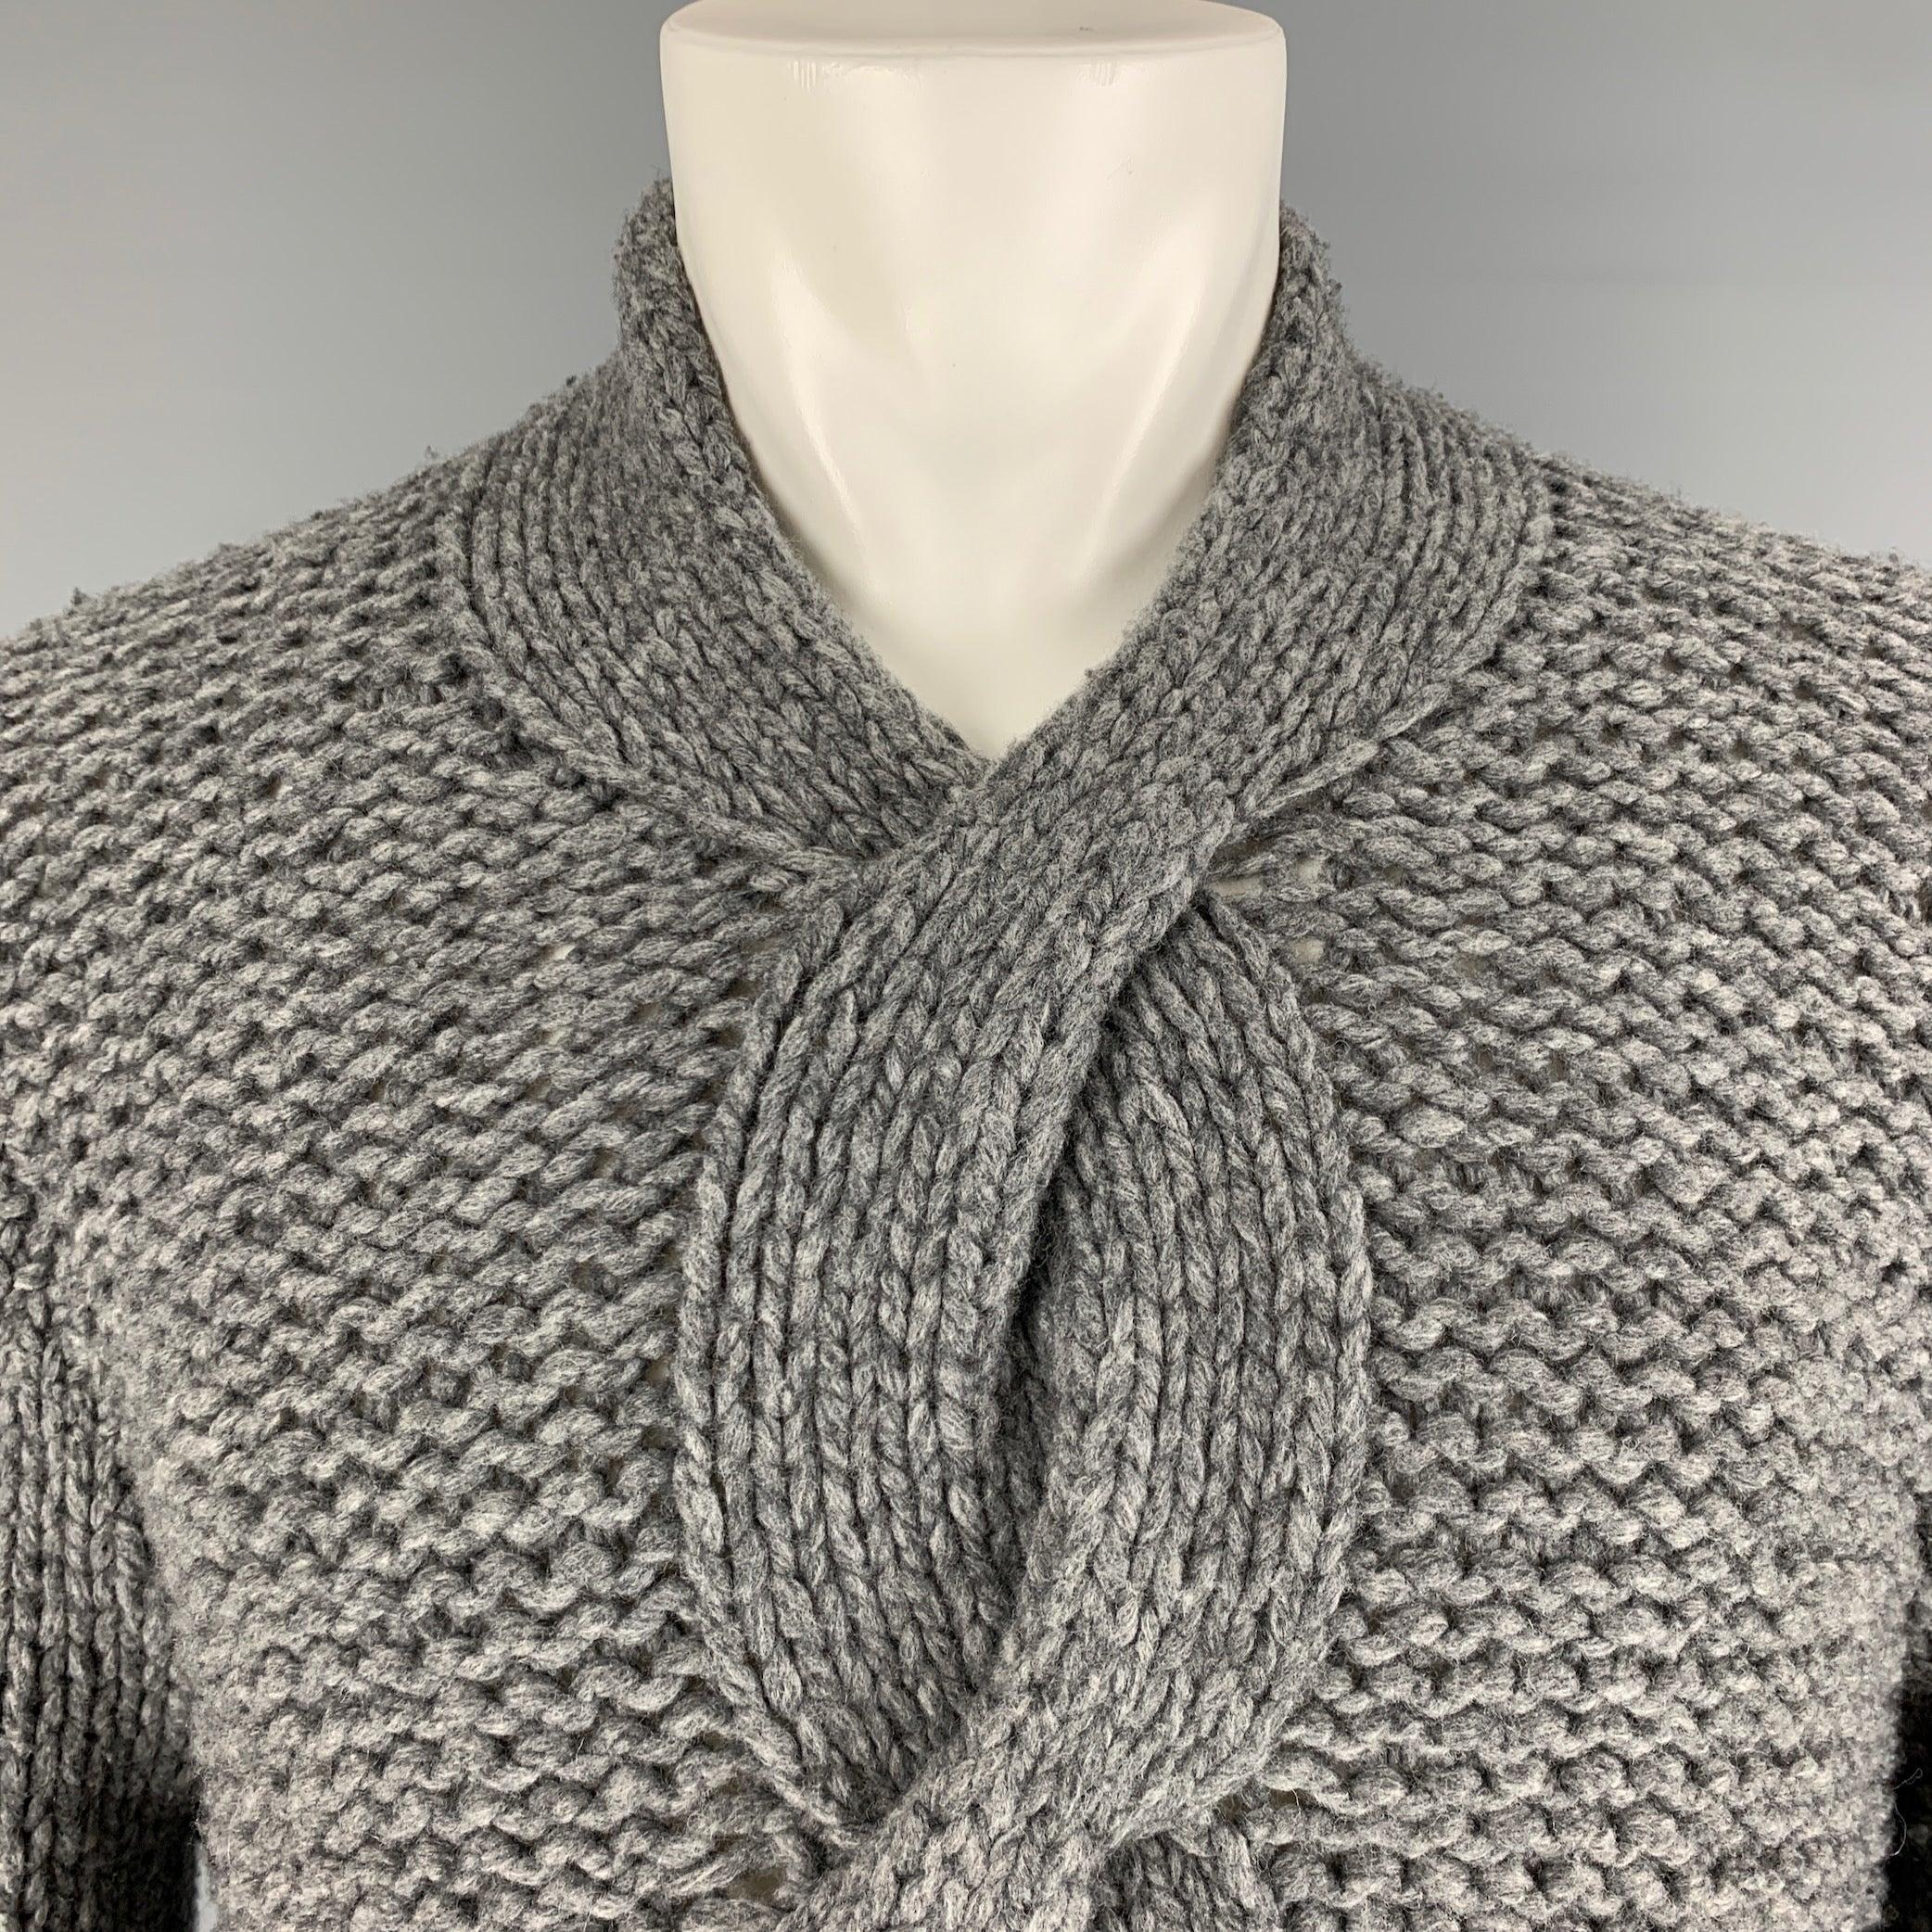 ANN DEMEULEMEESTER sweater comes in a grey virgin
 wool heavy knit material featuring a cable knit detail at front and a oversized style. Made in Belgium. Excellent Pre-Owned Condition. 

Marked:   M 

Measurements: 
 
Shoulder: 19.5 inches  Chest: